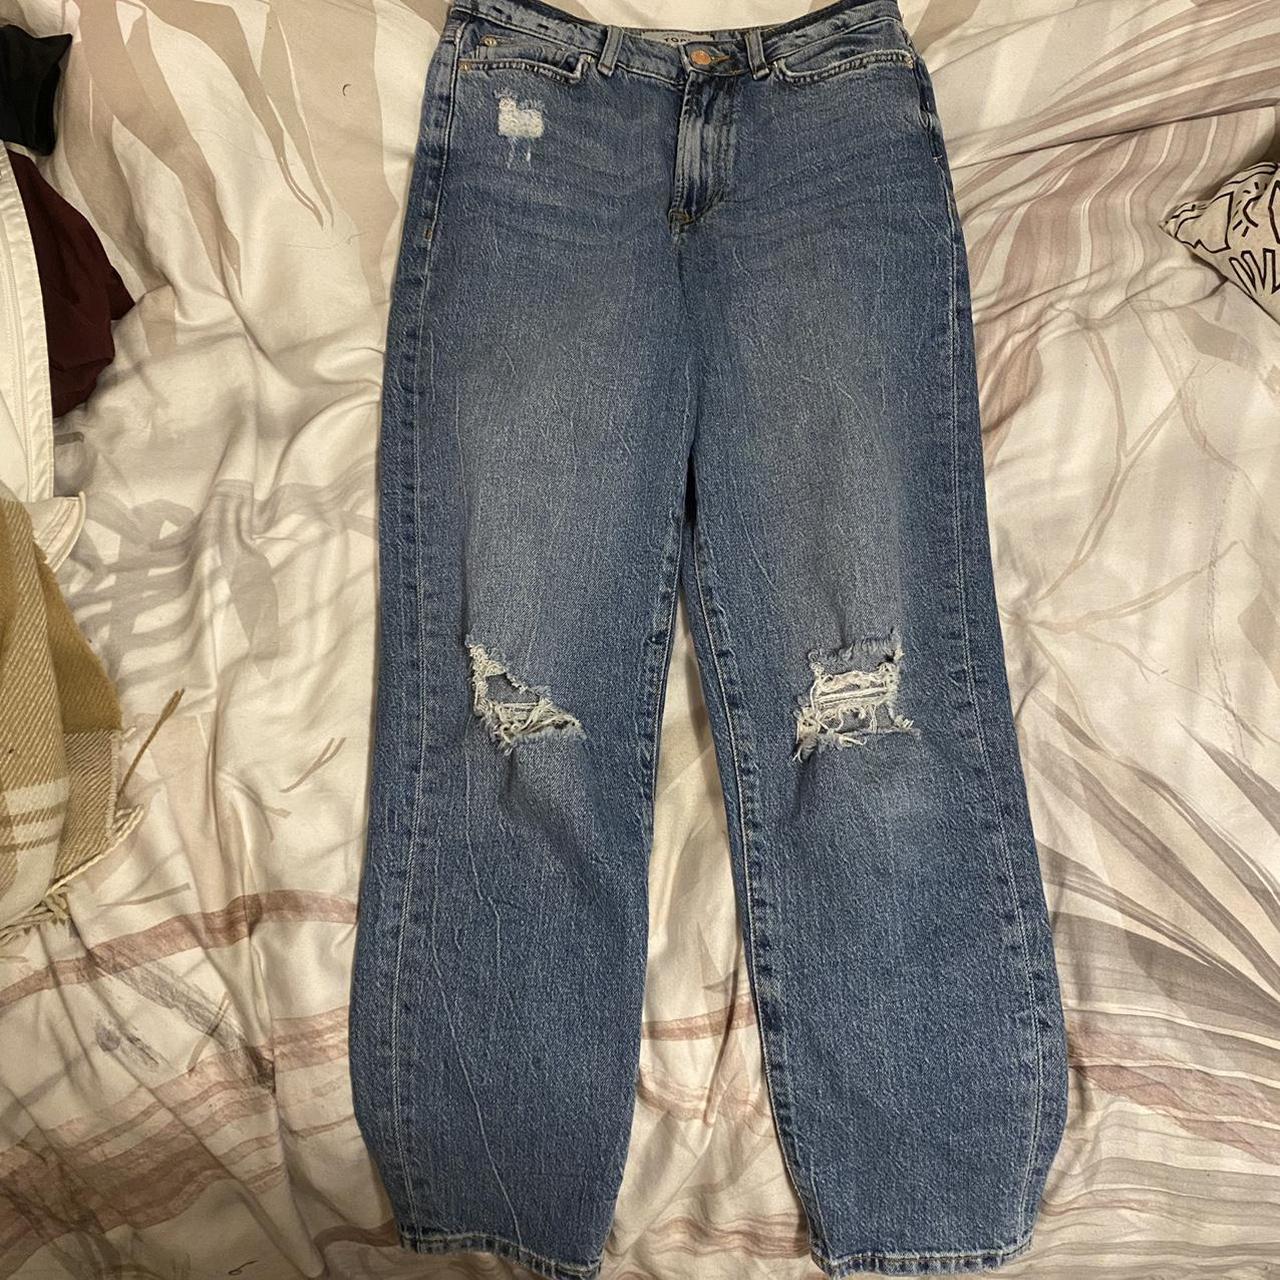 New Look, Tori Mom jeans, size 8. Only worn once out... - Depop